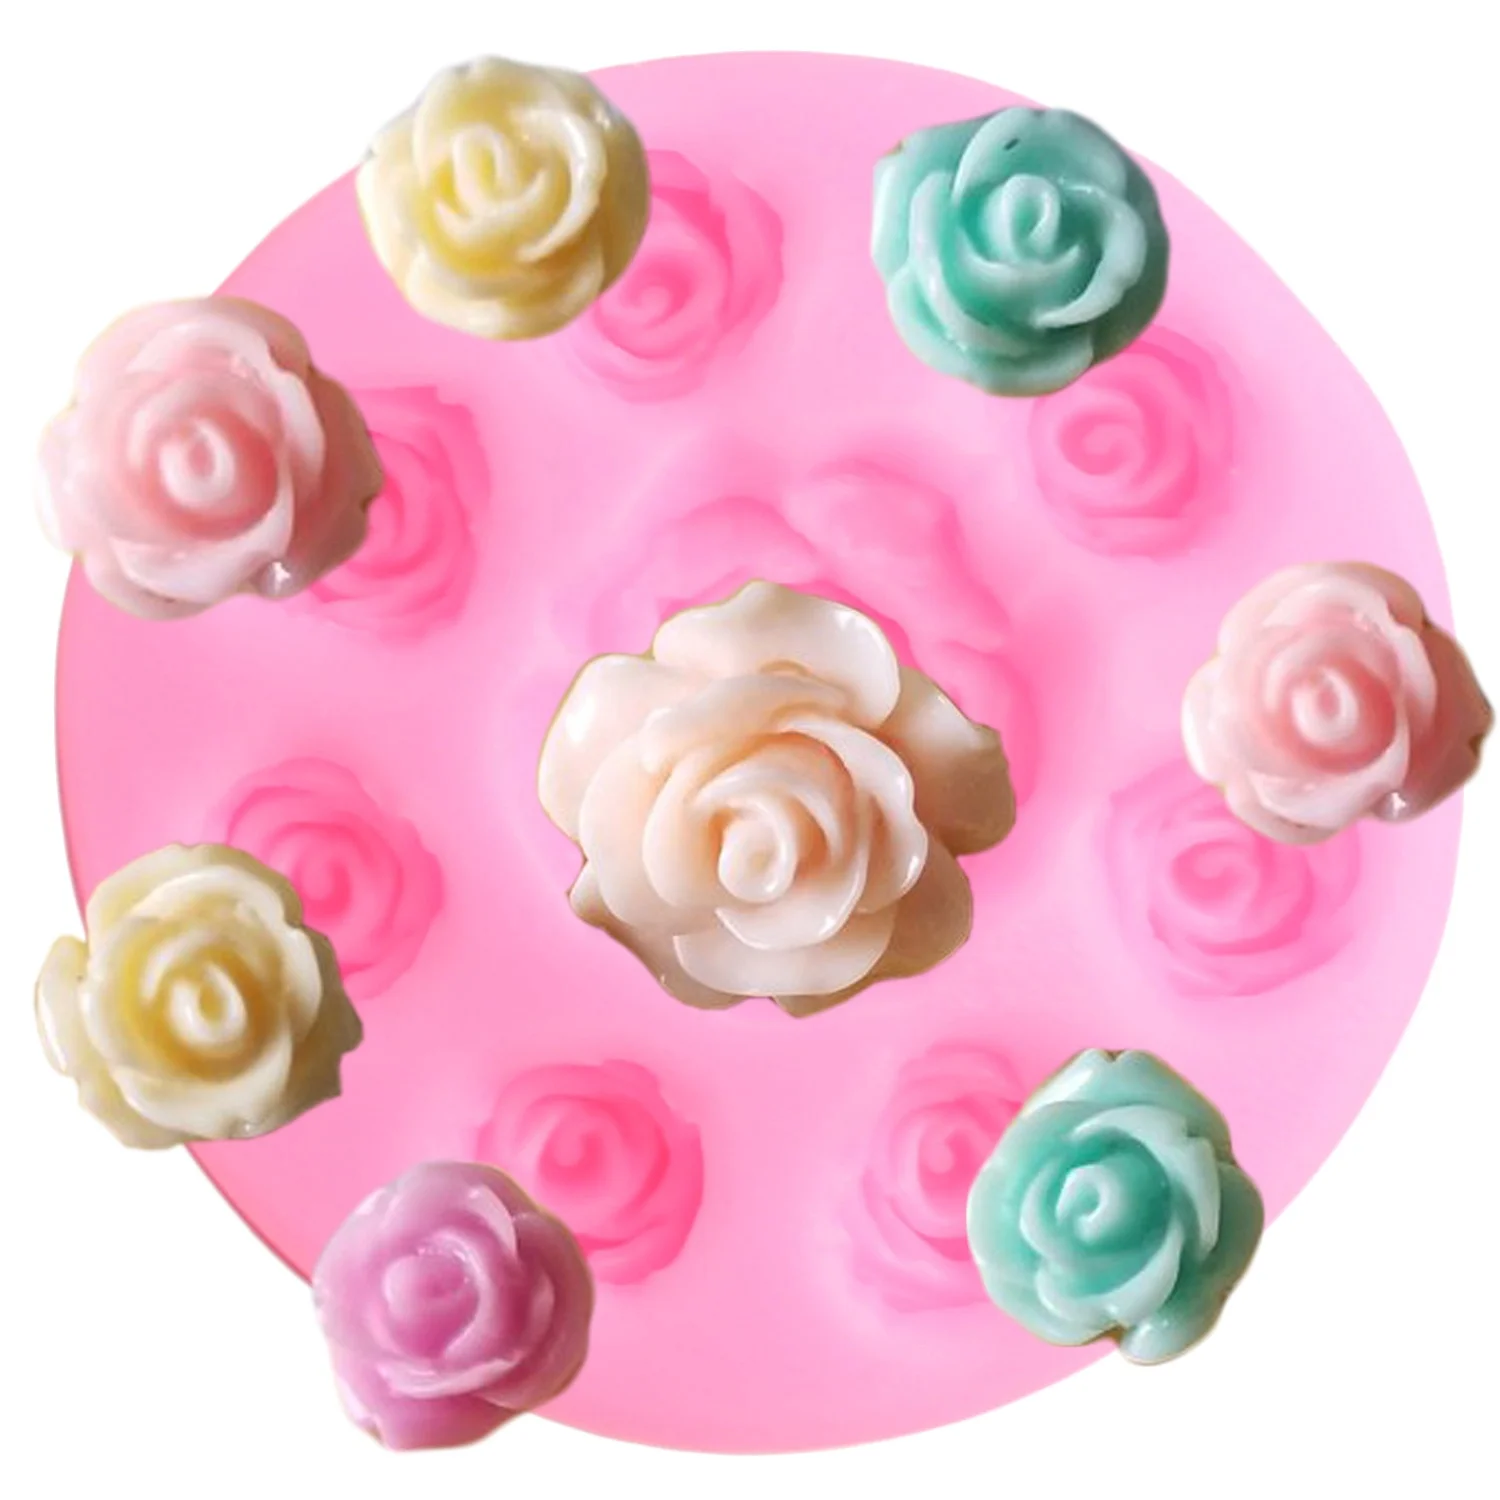 3D Rose Flower Silicone Fondant Mould Cake Decorating Chocolate Baking Mold Tool 